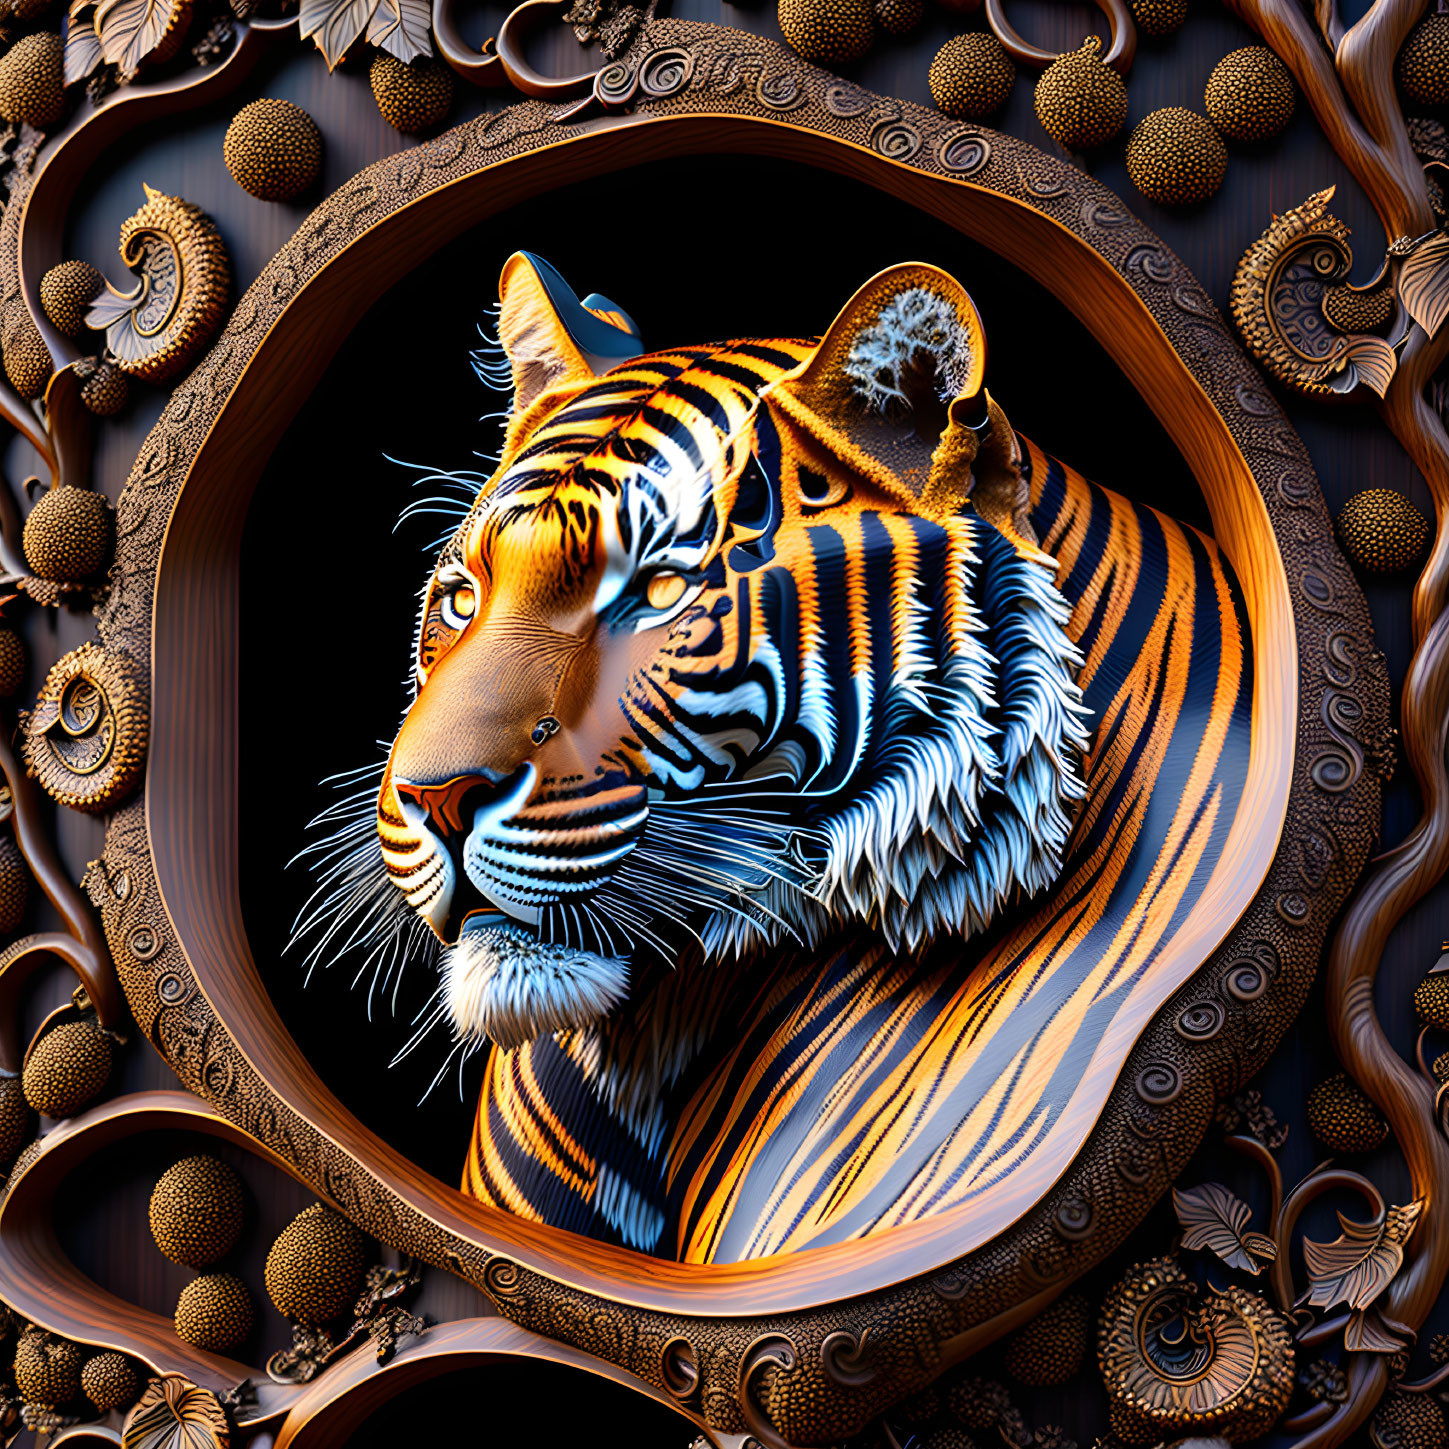 Colorful Tiger Head Artwork in Circular Frame Against Patterned Background